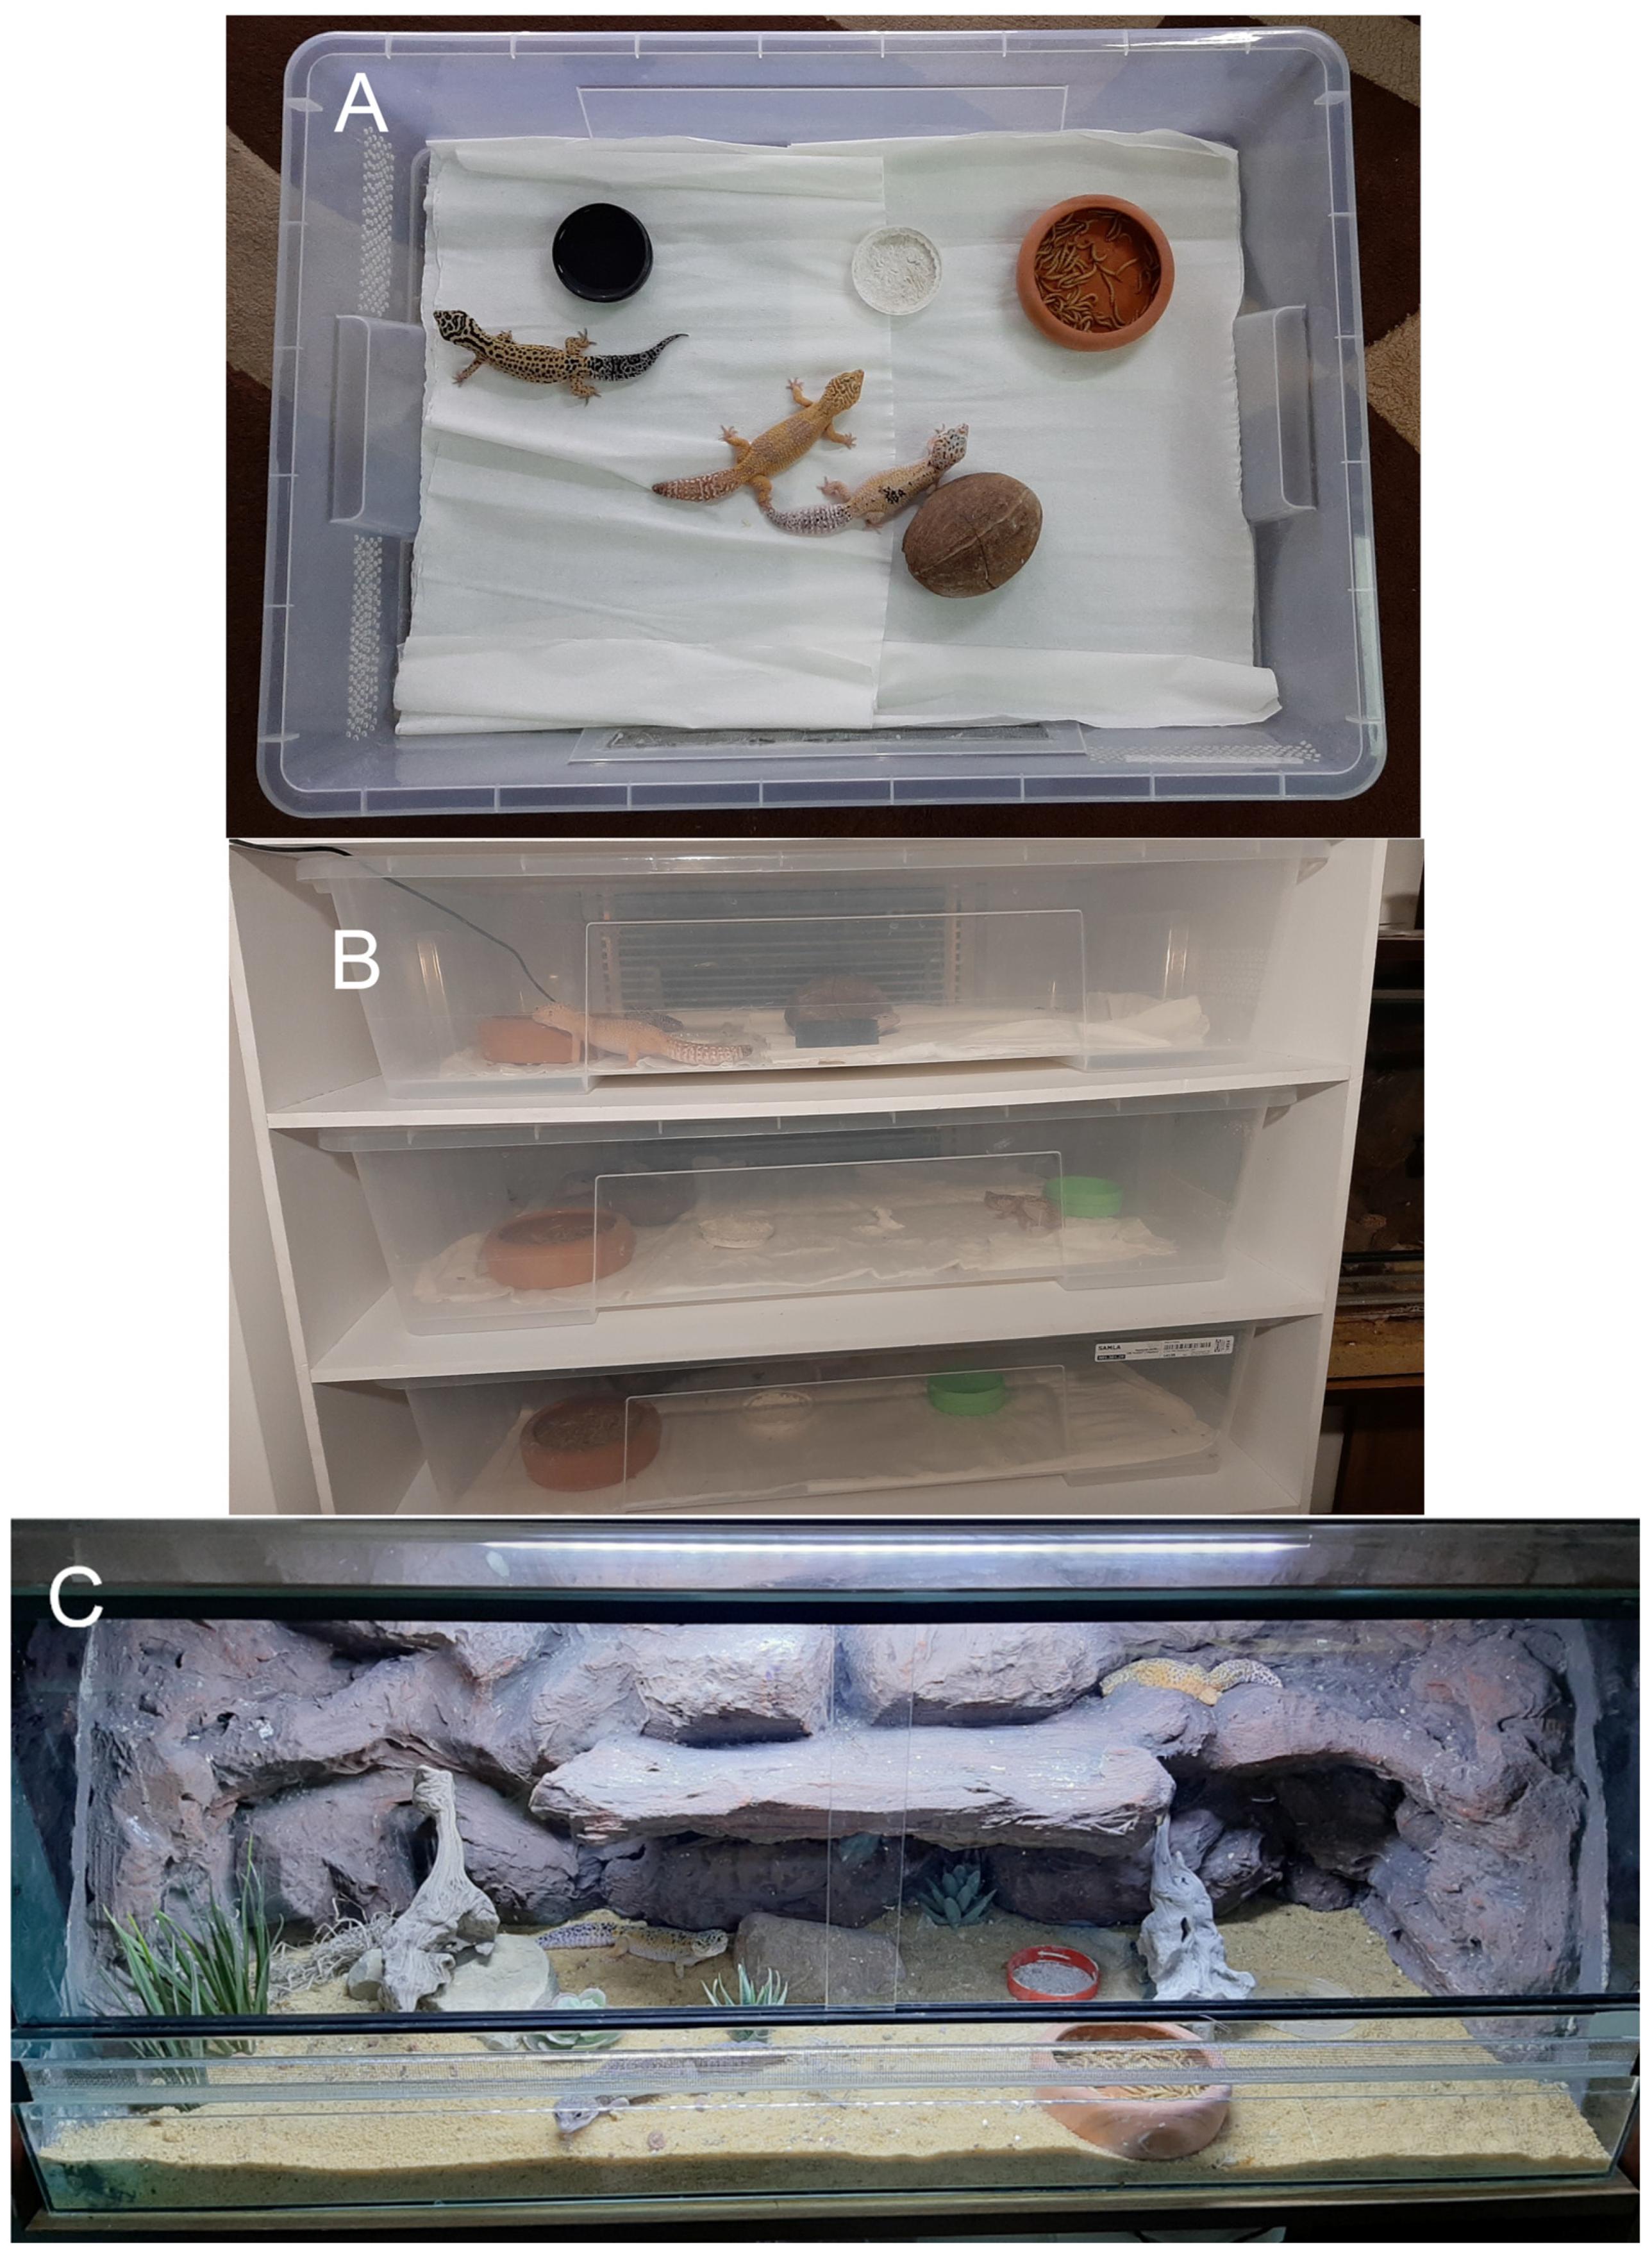 Blinke Ringlet spiralformet Animals | Free Full-Text | The Effect of Enrichment on Leopard Geckos  (Eublepharis macularius) Housed in Two Different Maintenance Systems (Rack  System vs. Terrarium)